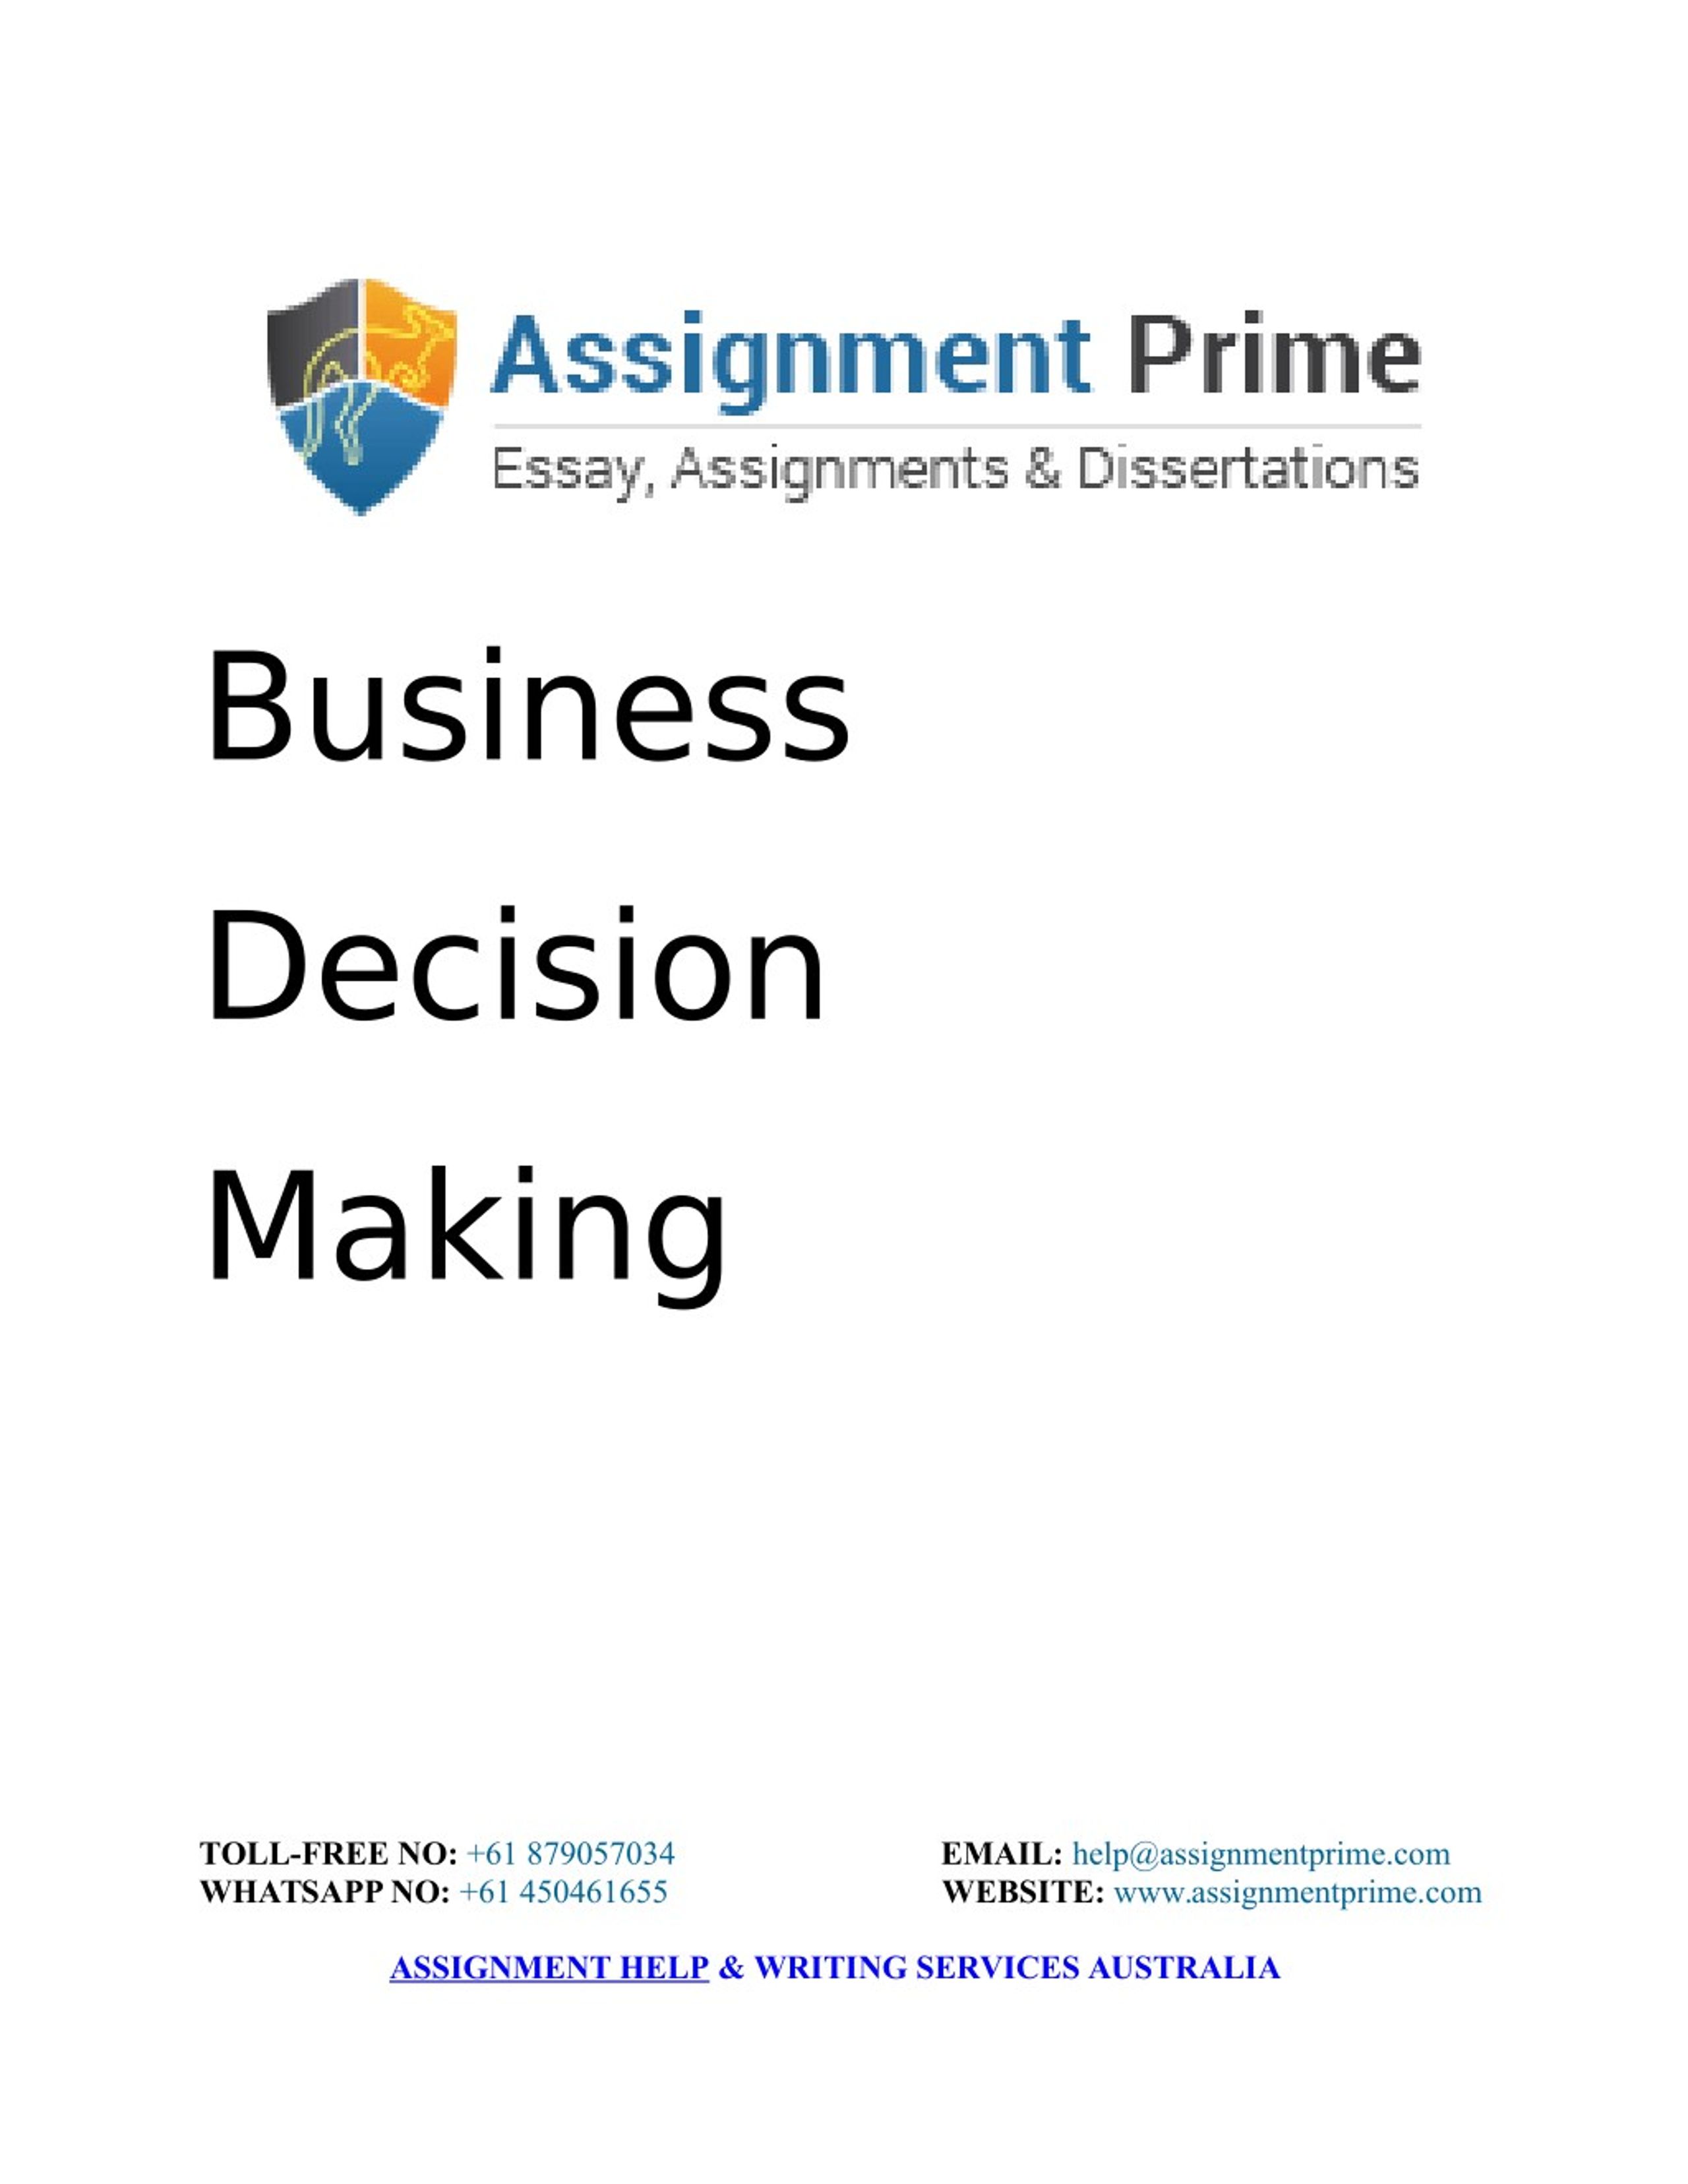 organisational decision making assignment